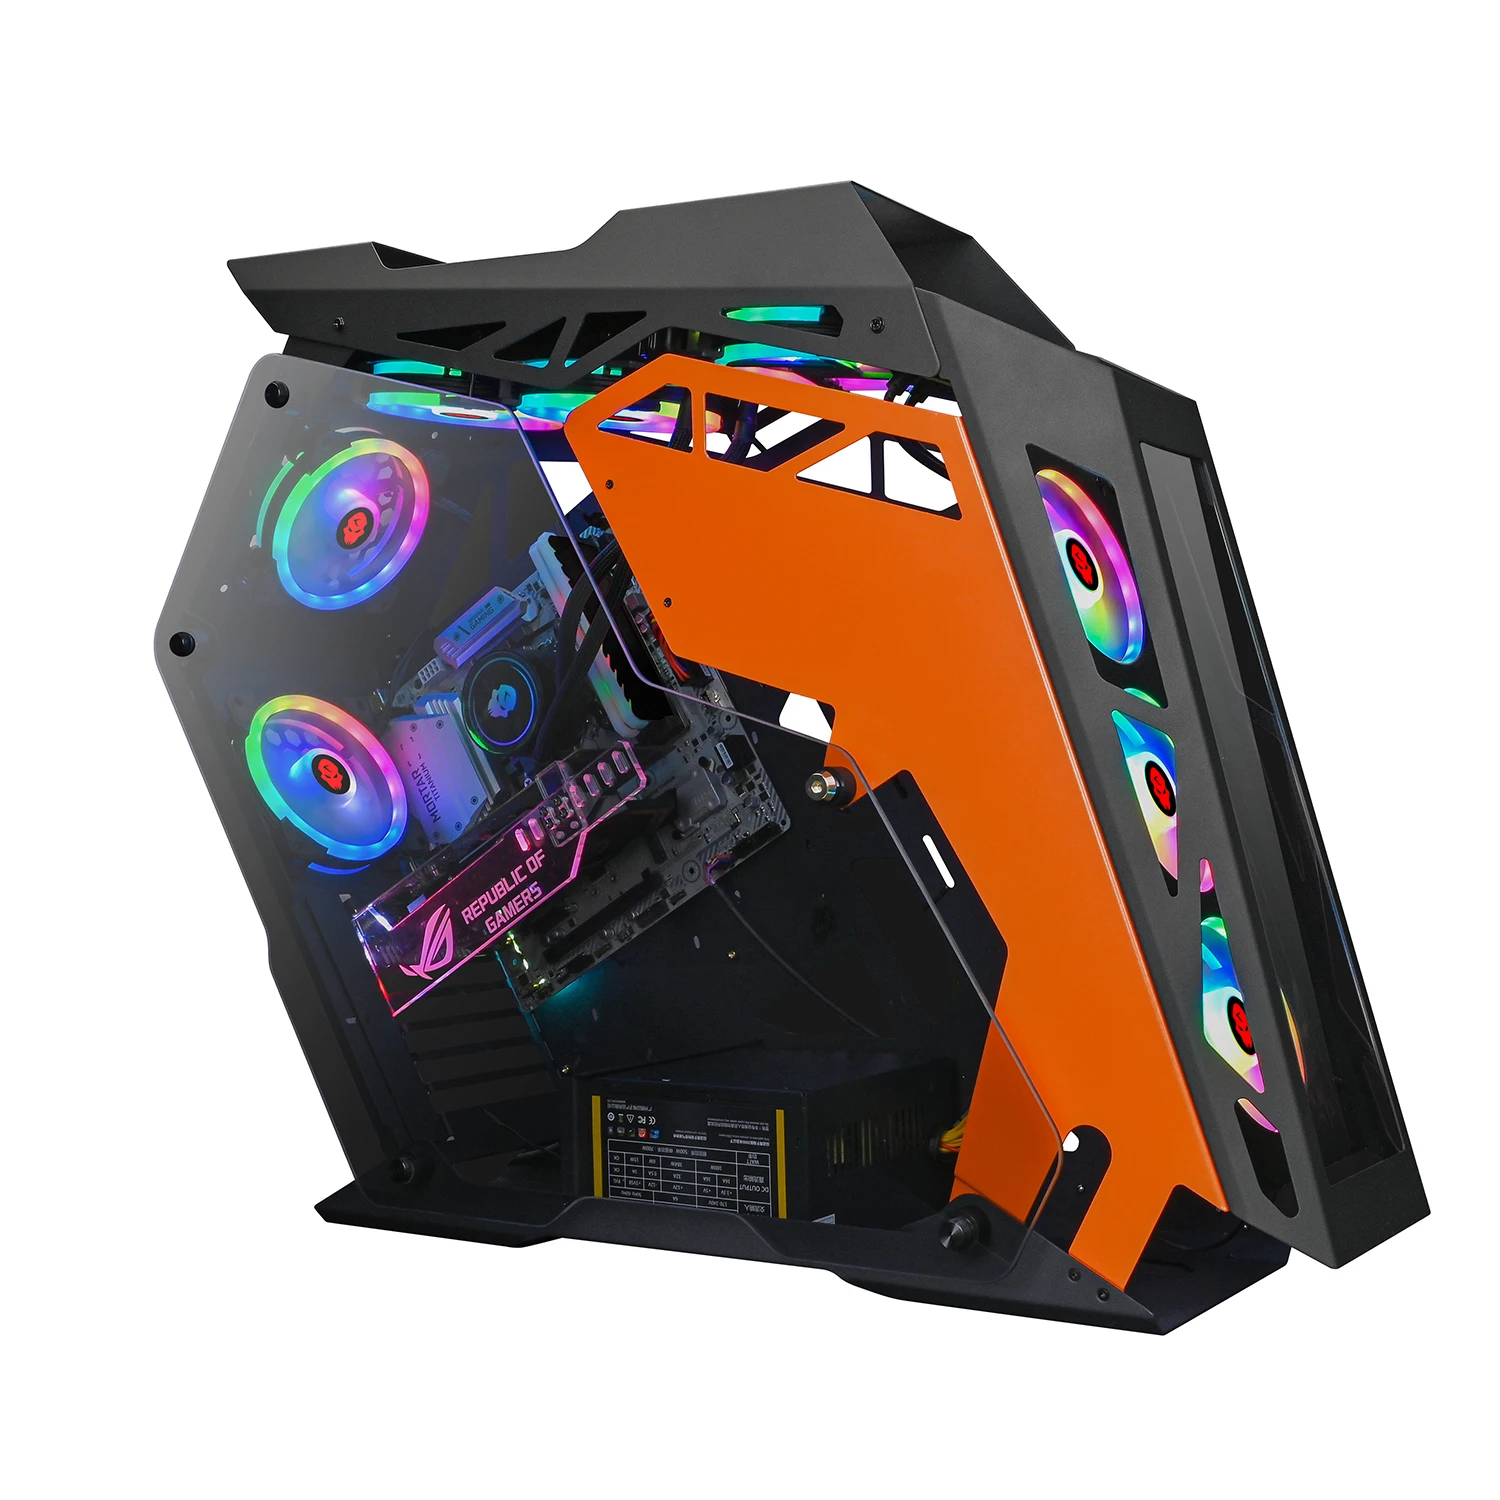 Samenhangend zeker Fabrikant Hot Sales Mid Tower Atx Game Gabinete Gaming Computer Pc Case For Home  Gamer Desktop Using - Buy Case Atx Pc,Gaming Pc Case Computer,Atx Gaming Computer  Case Product on Alibaba.com